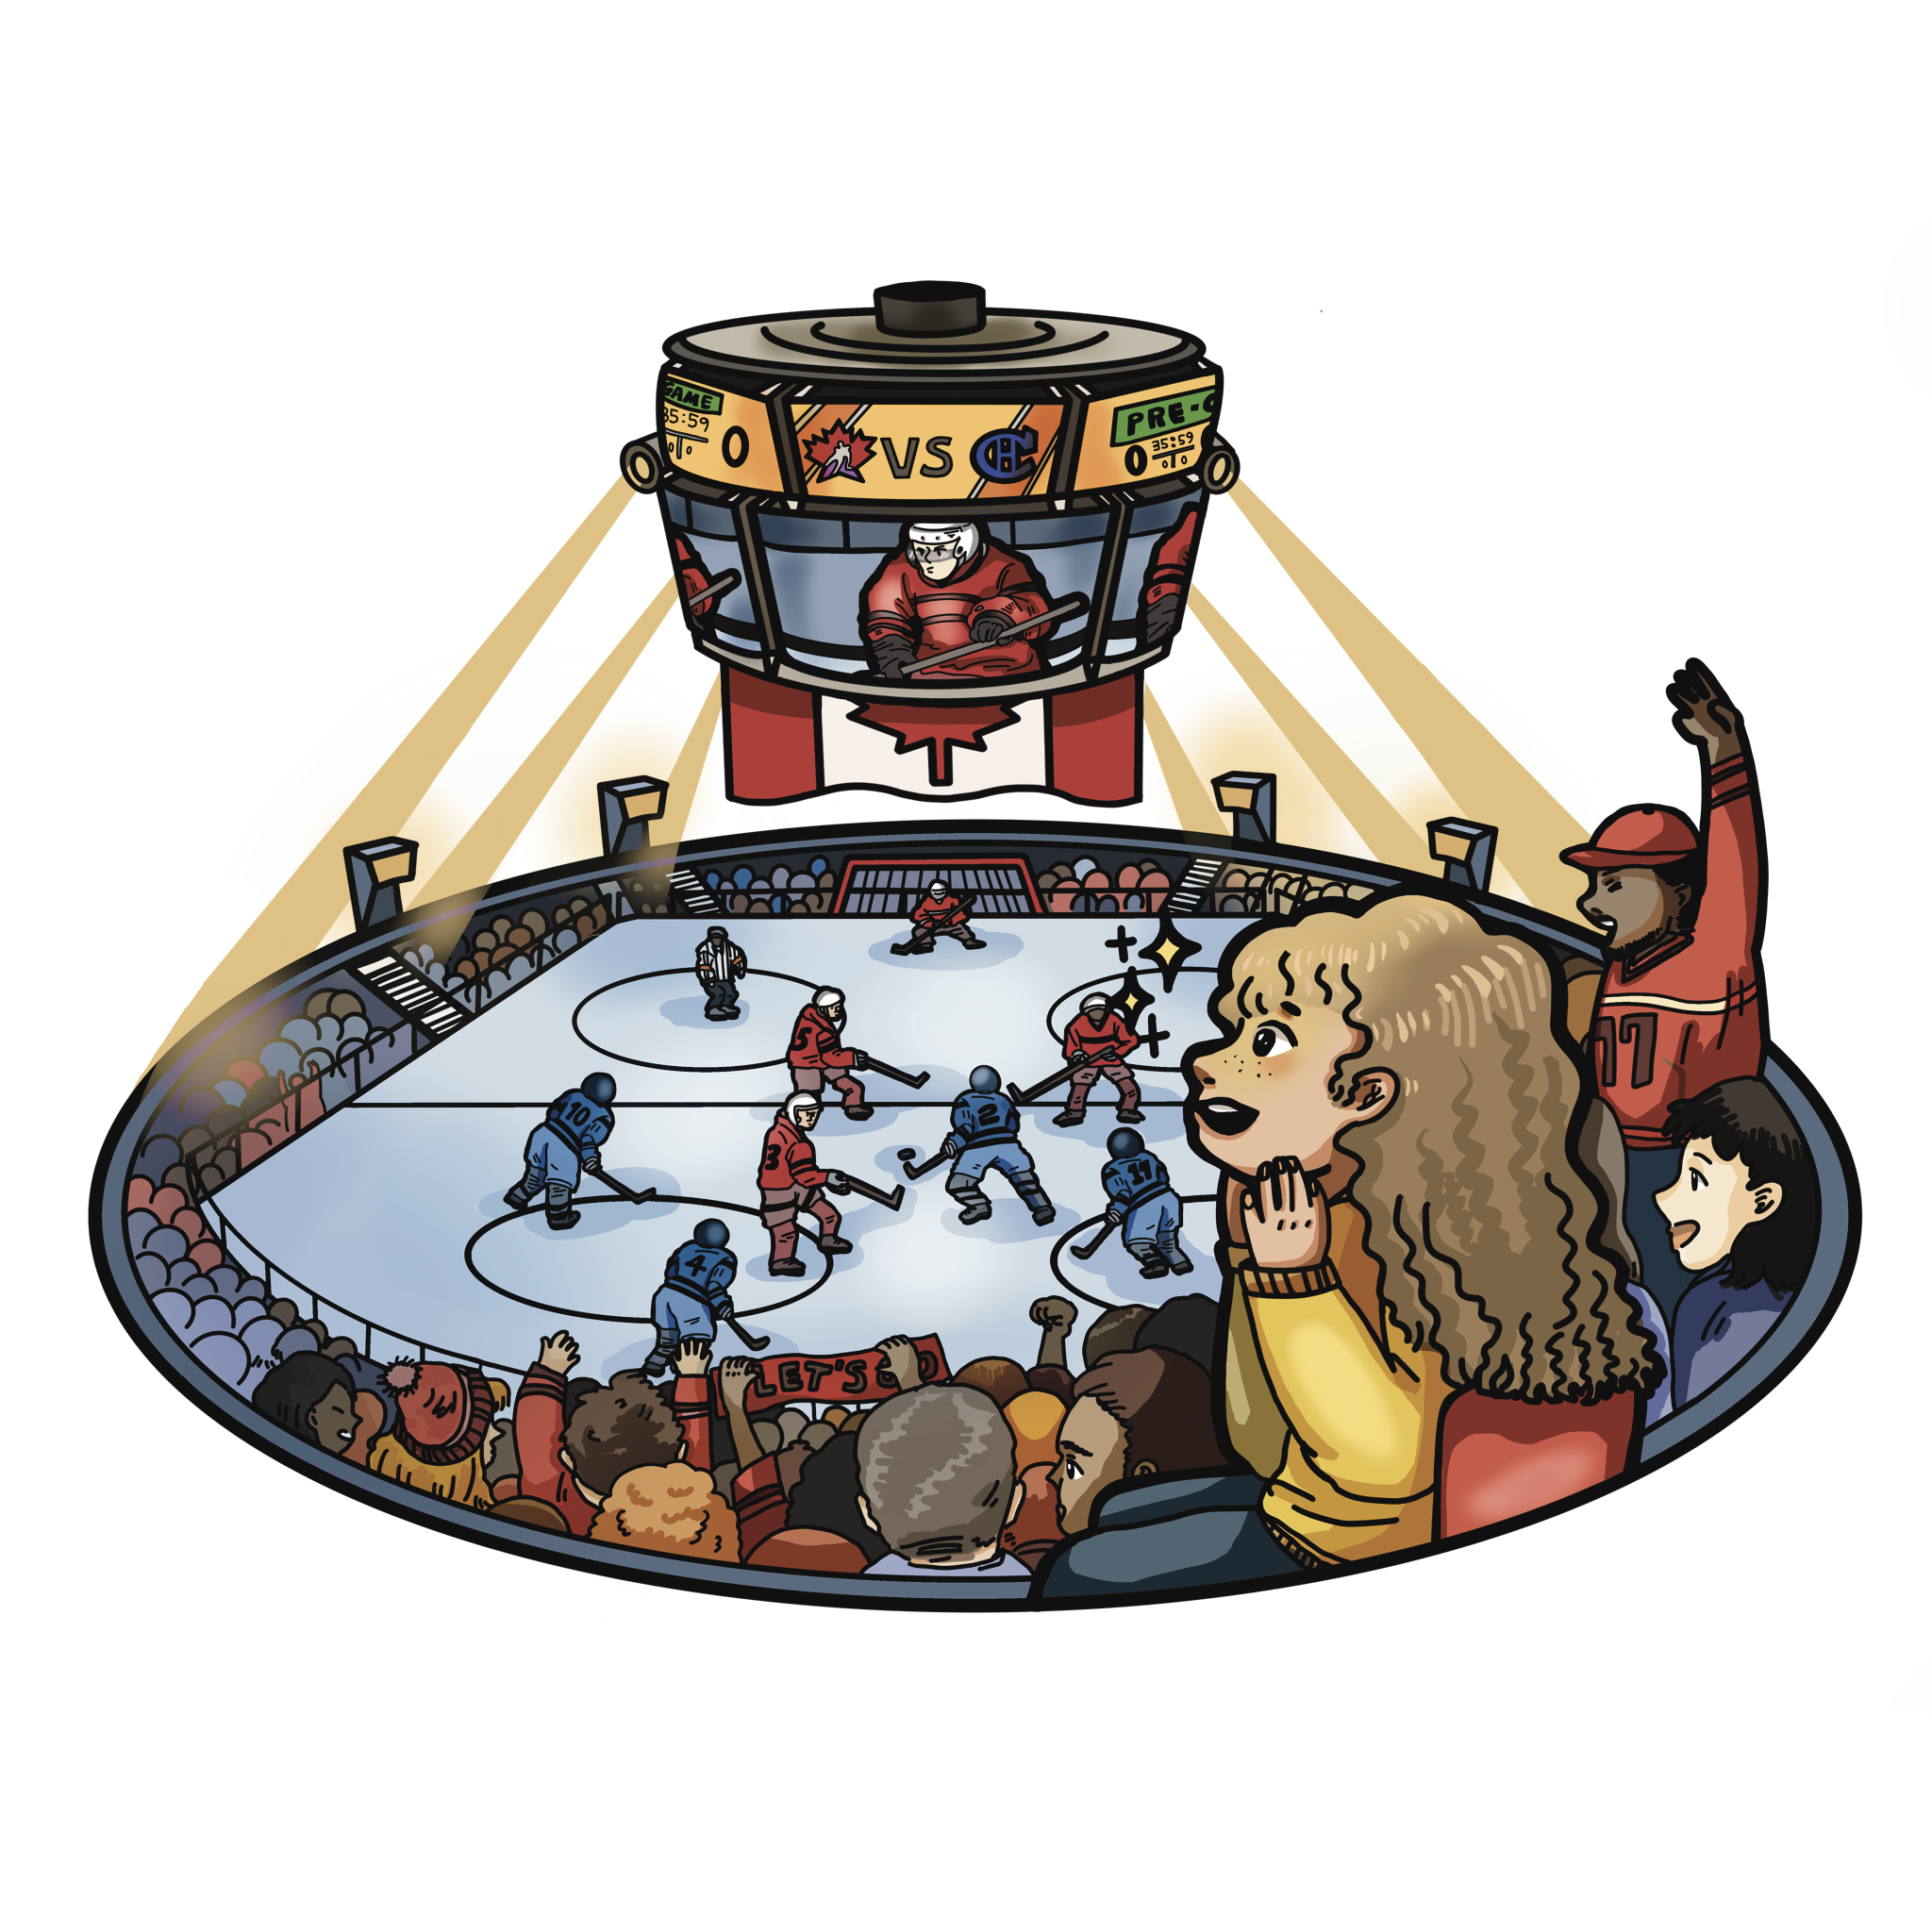 illustration of a girl with long brown curly hair and bangs sitting amazed amongst a crowd at a hockey game.